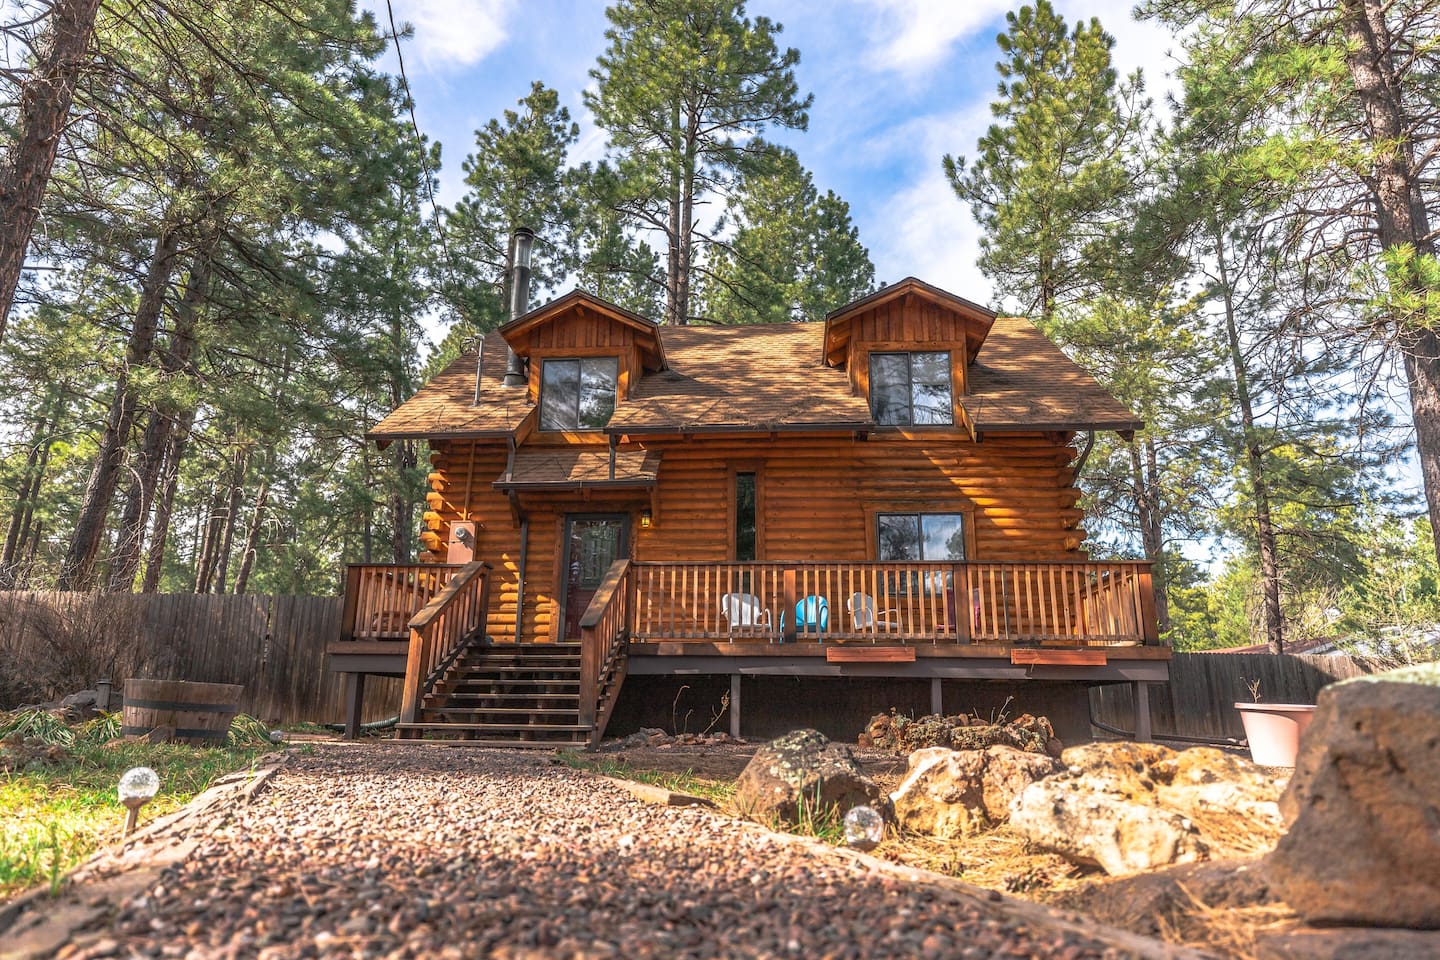 The Basecamp is one of the 15 best Airbnbs in Flagstaff